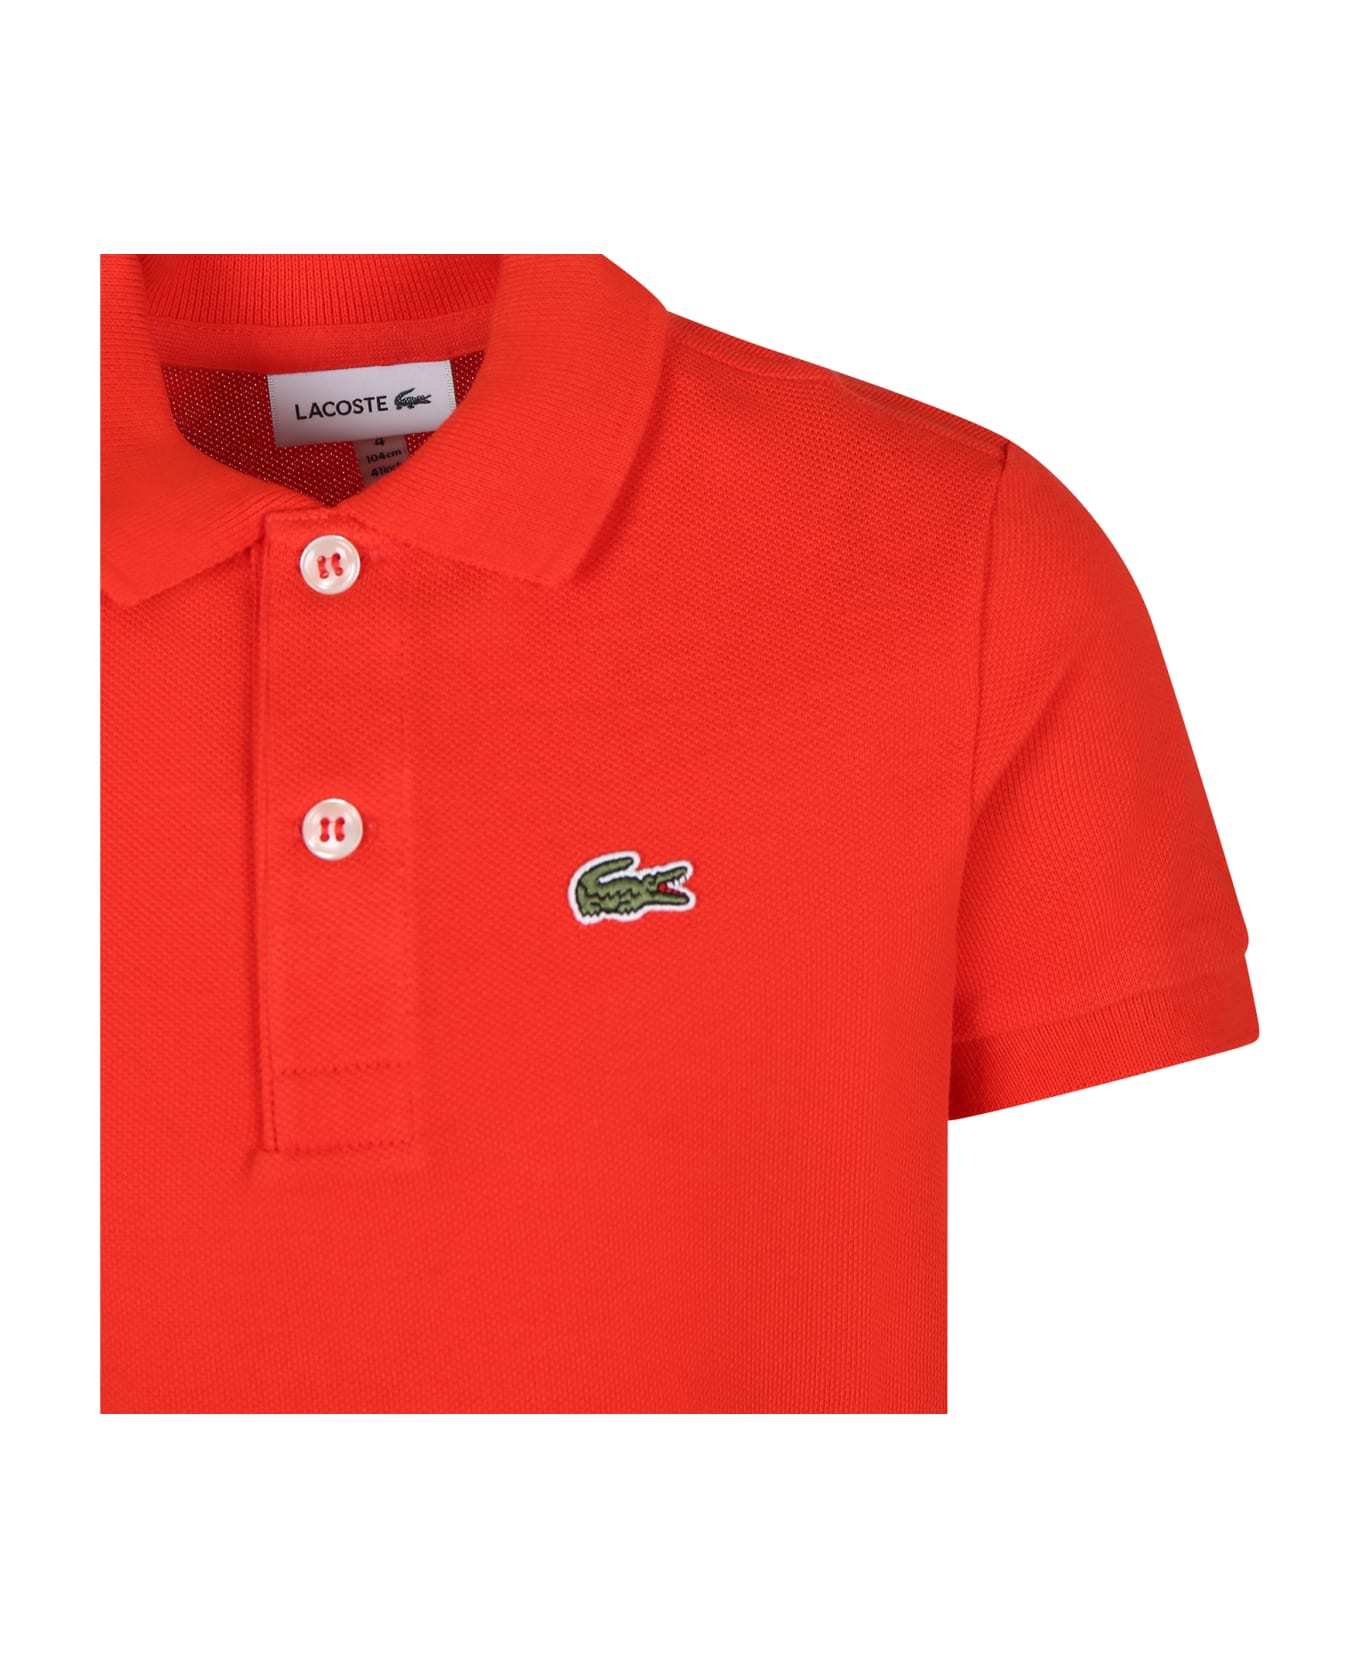 Lacoste Red Polo Shirt For Boy With Crocodile - Red